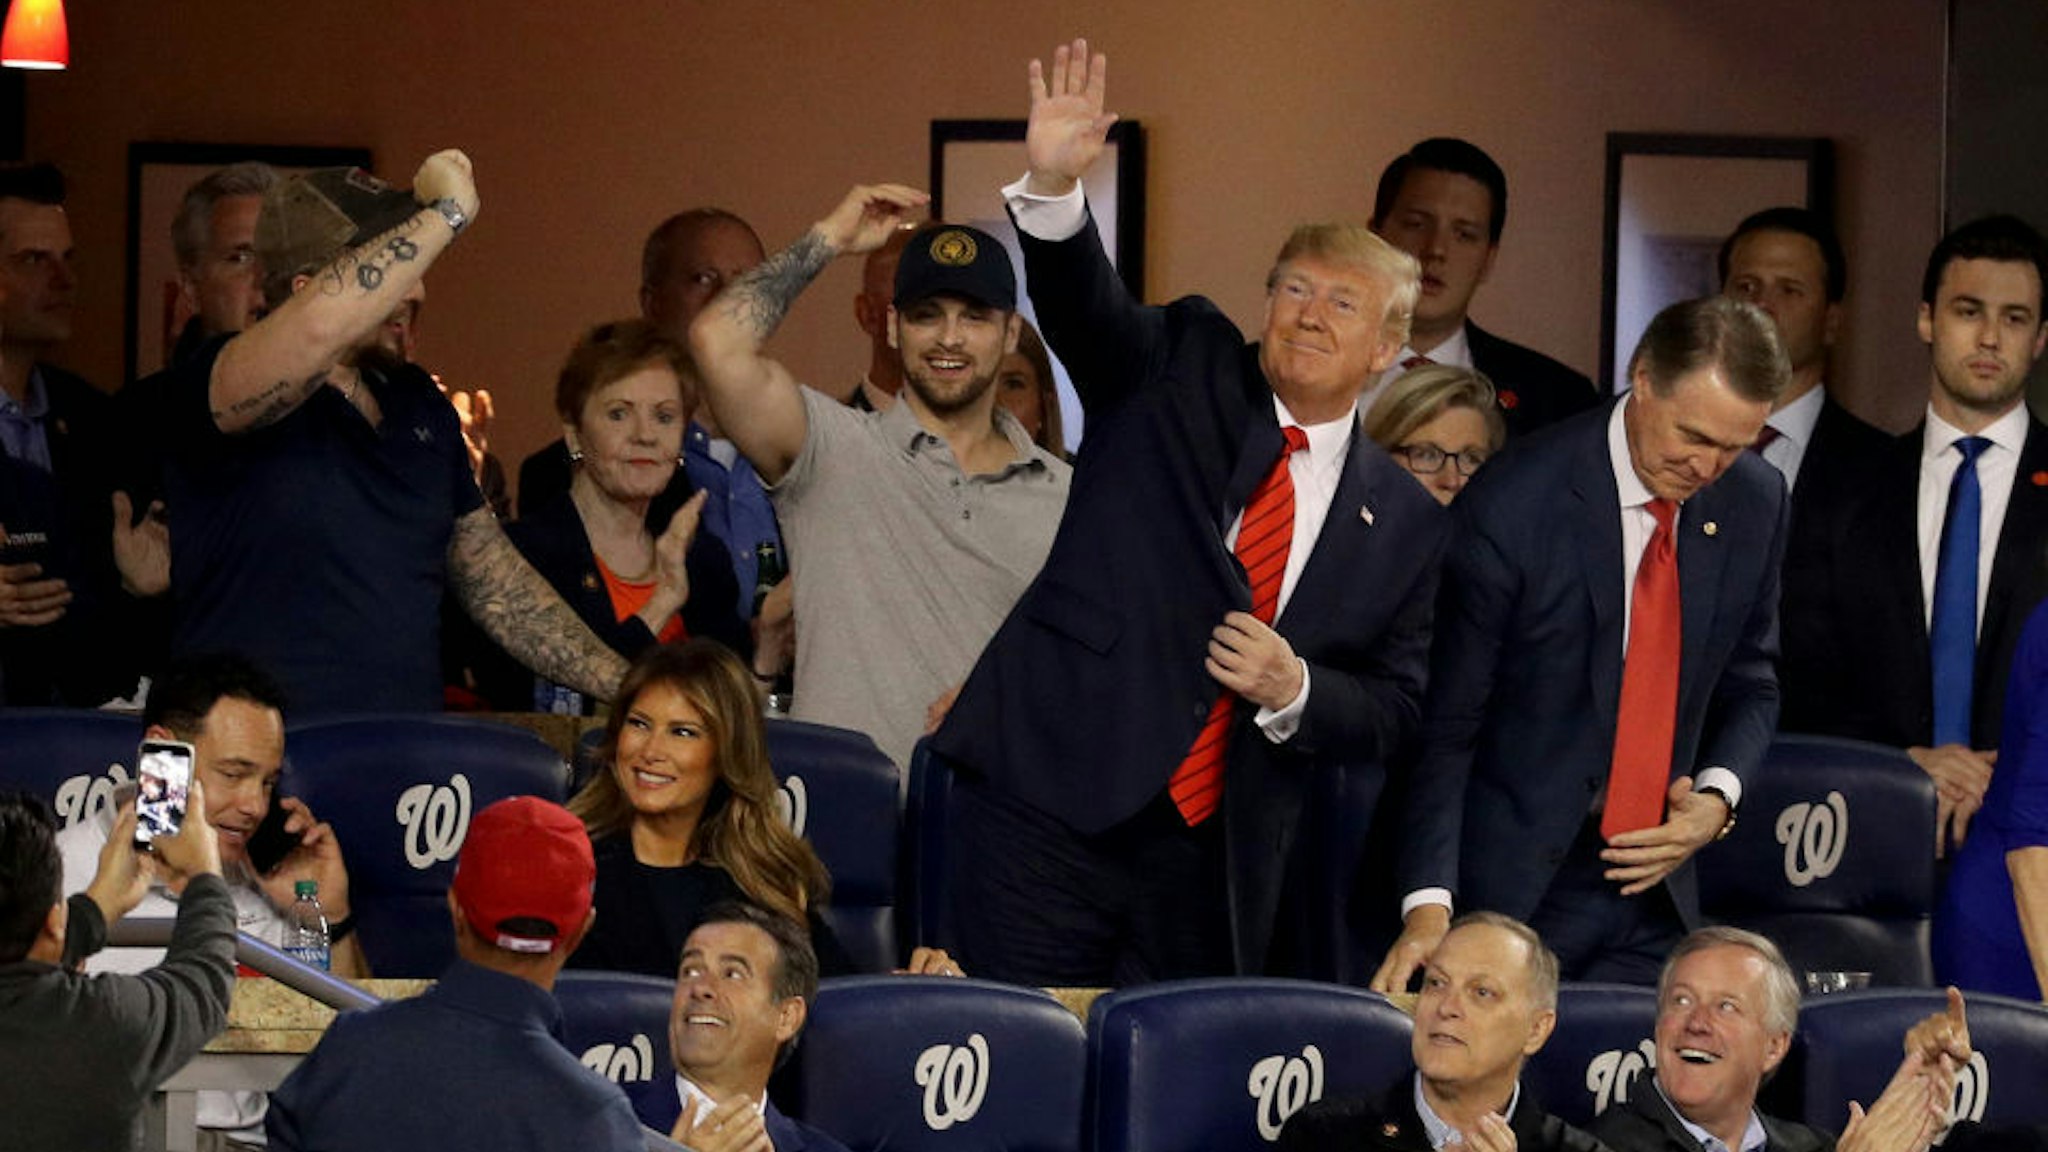 President Donald Trump attends Game Five of the 2019 World Series between the Houston Astros and the Washington Nationals at Nationals Park on October 27, 2019 in Washington, DC. (Photo by Will Newton/Getty Images)